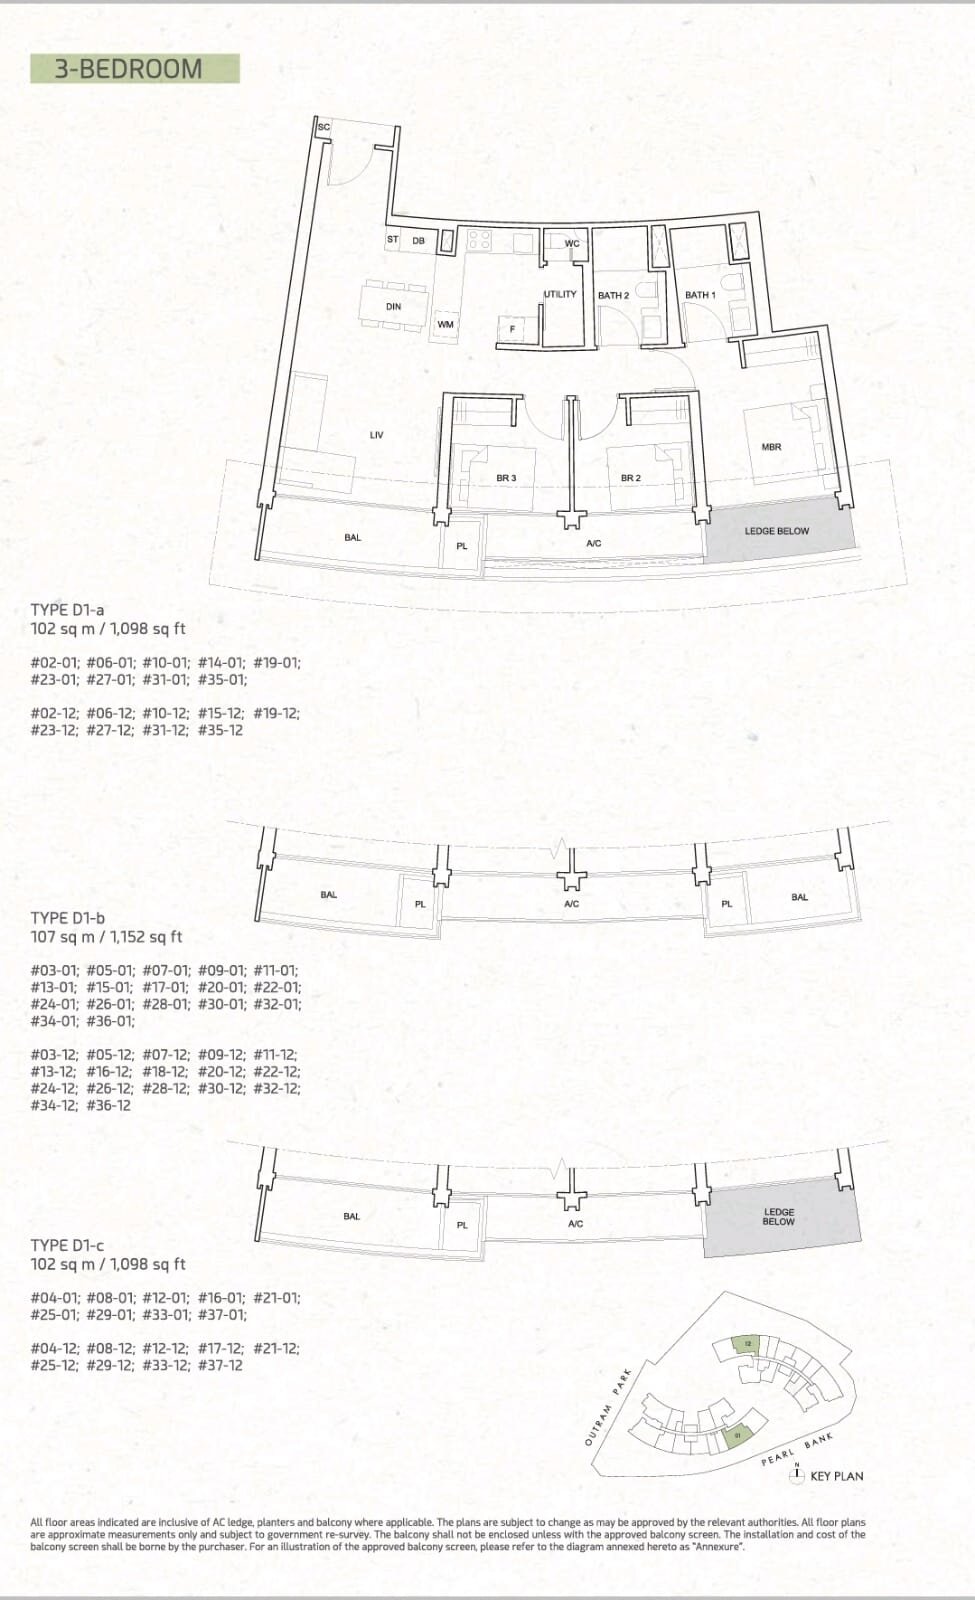 OPB Floor plan 3B D1-a, b and c